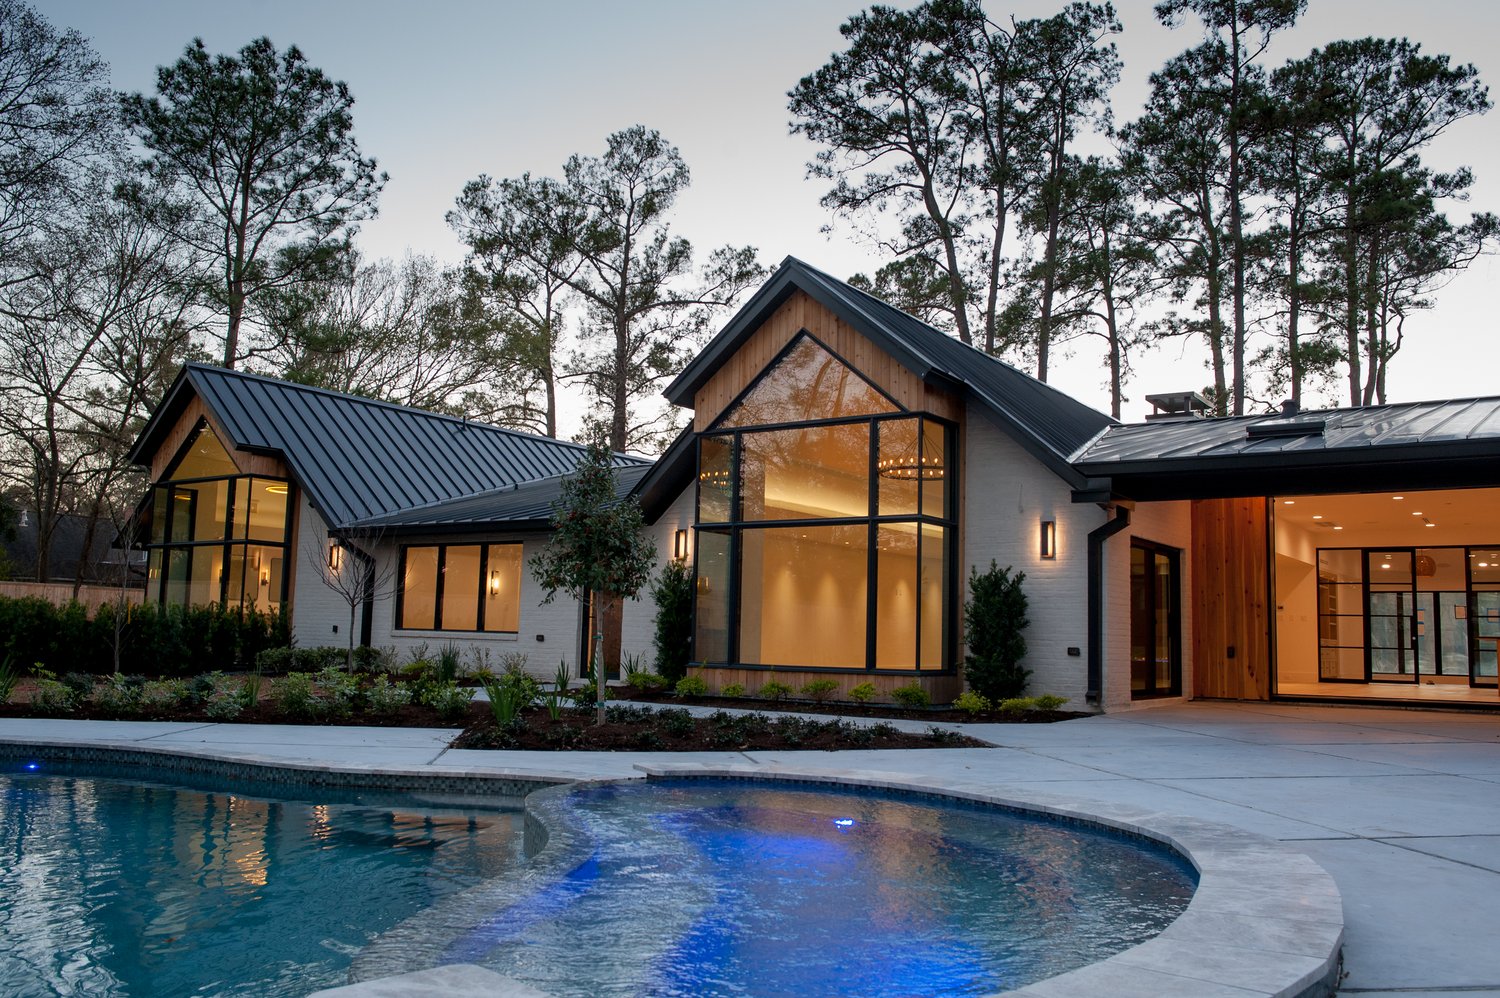 What Are the Steps to Building a Custom Home?